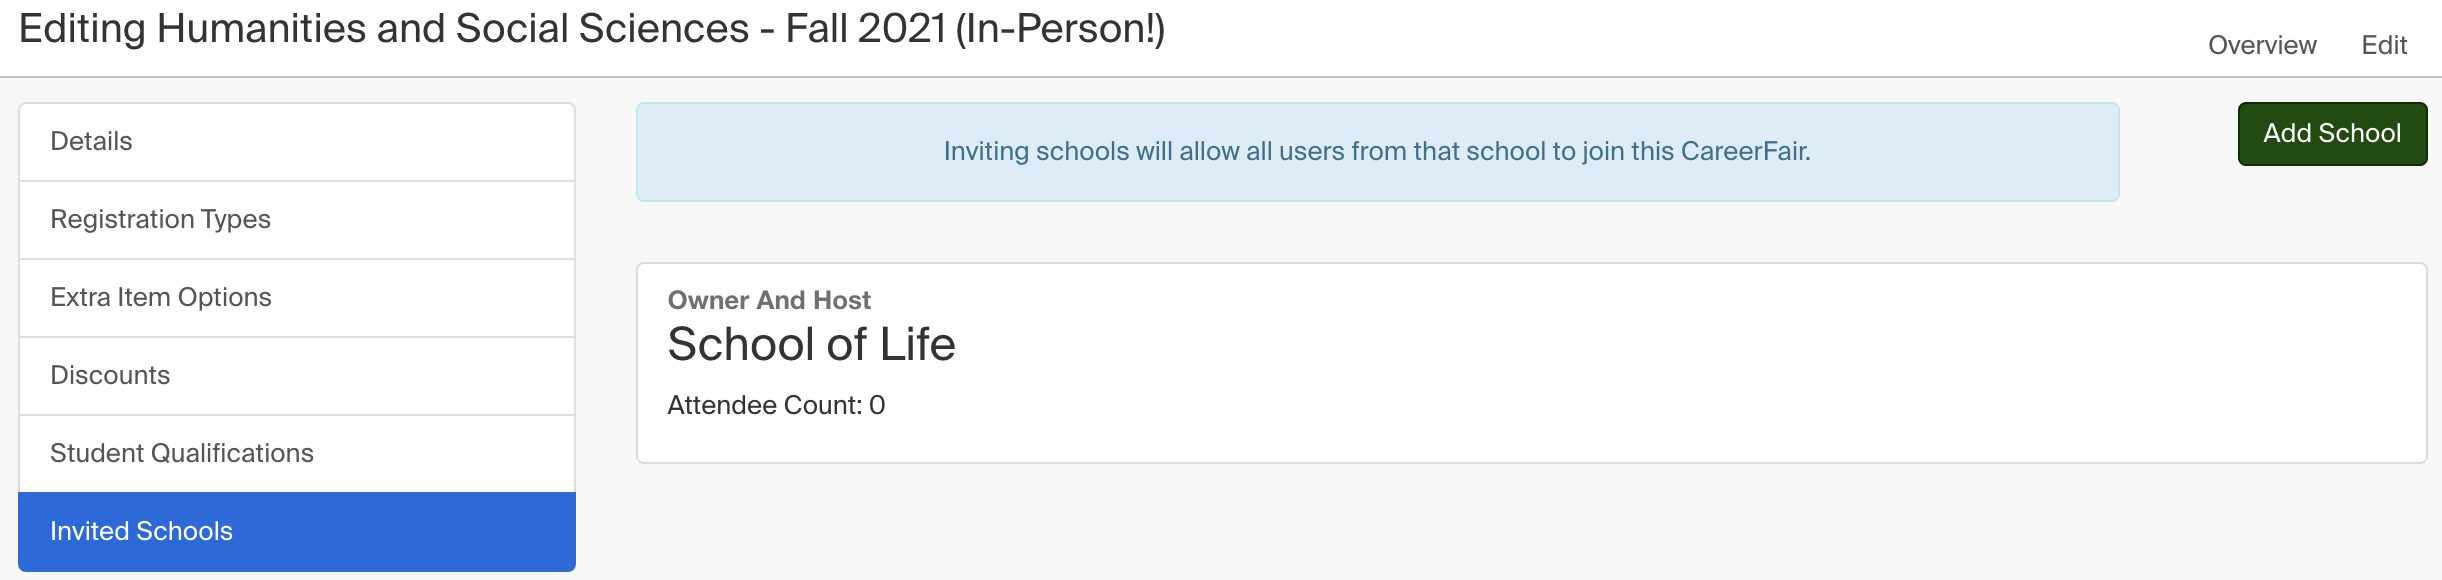 Add_school_example.png